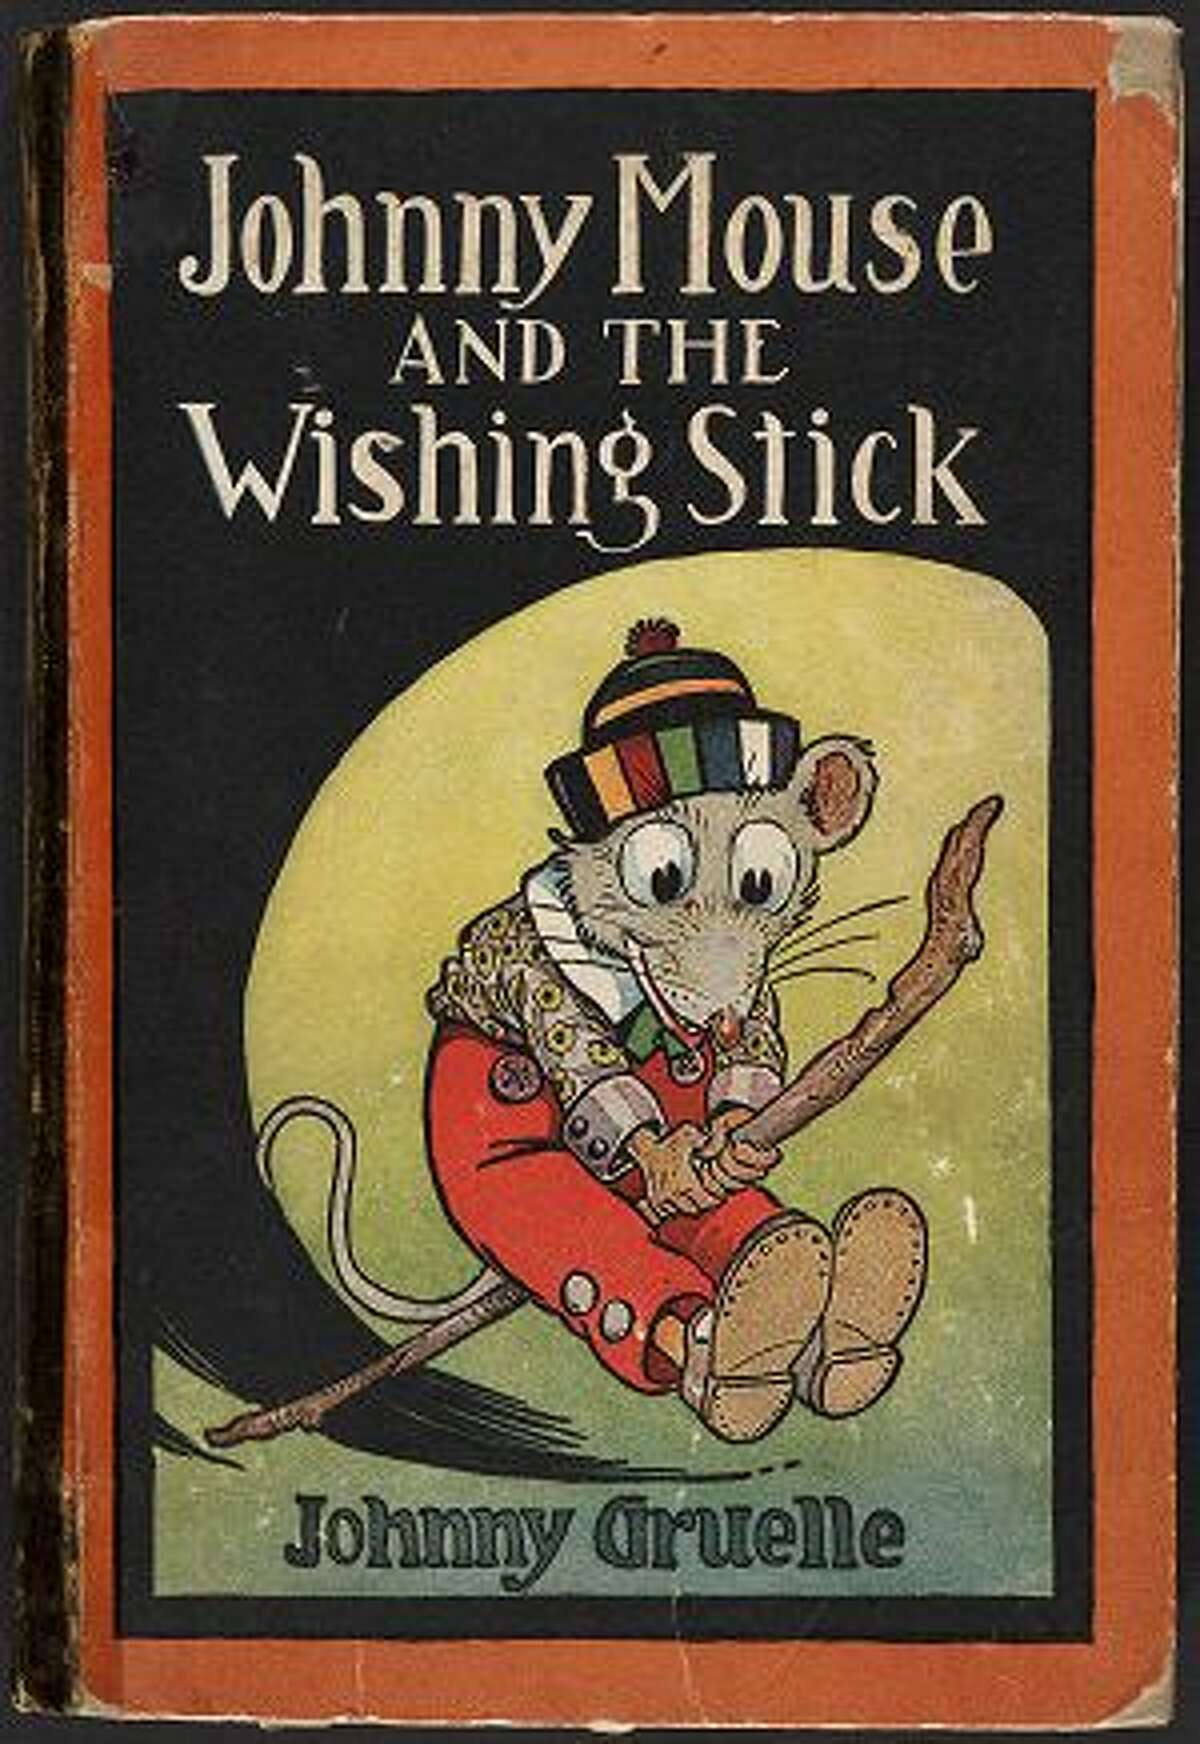 Johnny Mouse and the Wishing Stick (Bobbs-Merrill, 1922), a children's book written and illustrated by Johnny Gruelle (1880-1938).